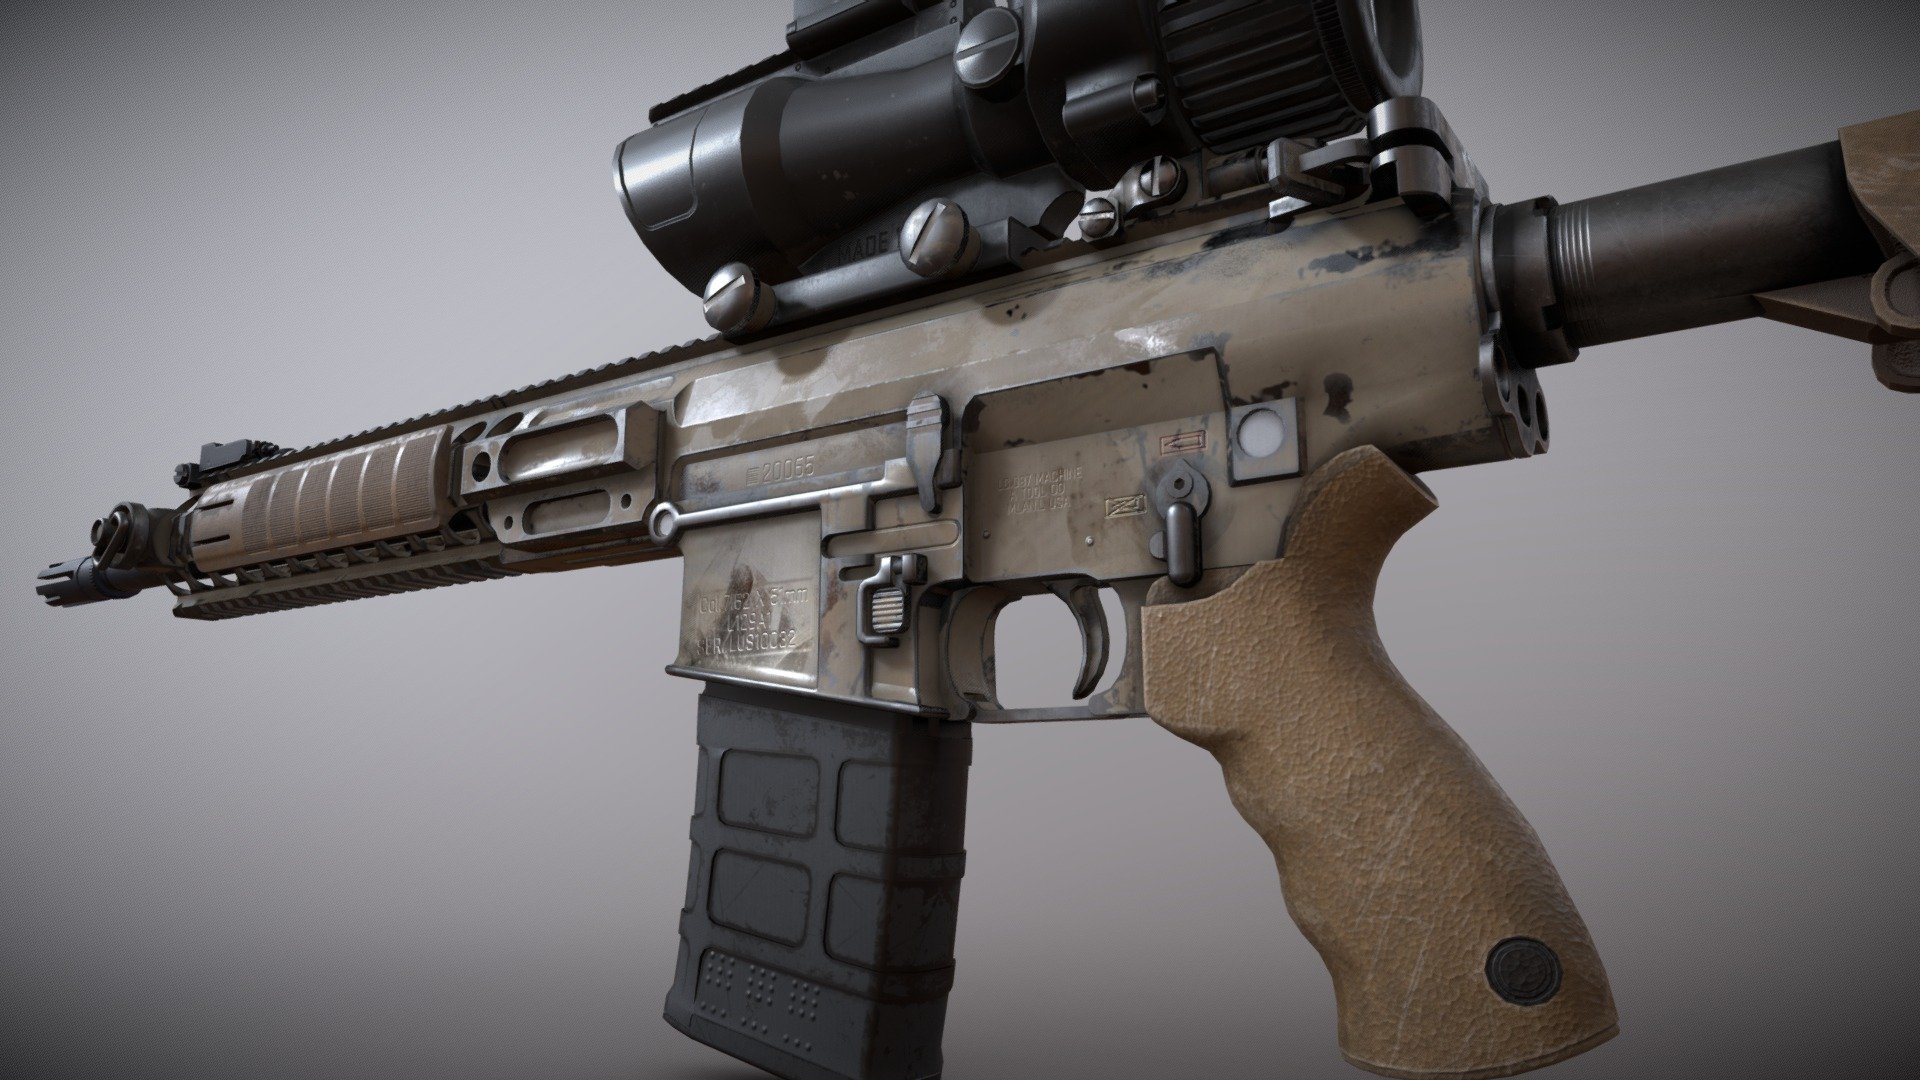 3D high-detailed model of L129A1 Assault Rifle

Every good guy should have a good gun.

Made with one own material. Object named with logically types.

8K PBR Textures + AO.

Can be used in games as well as render pictures 3d model